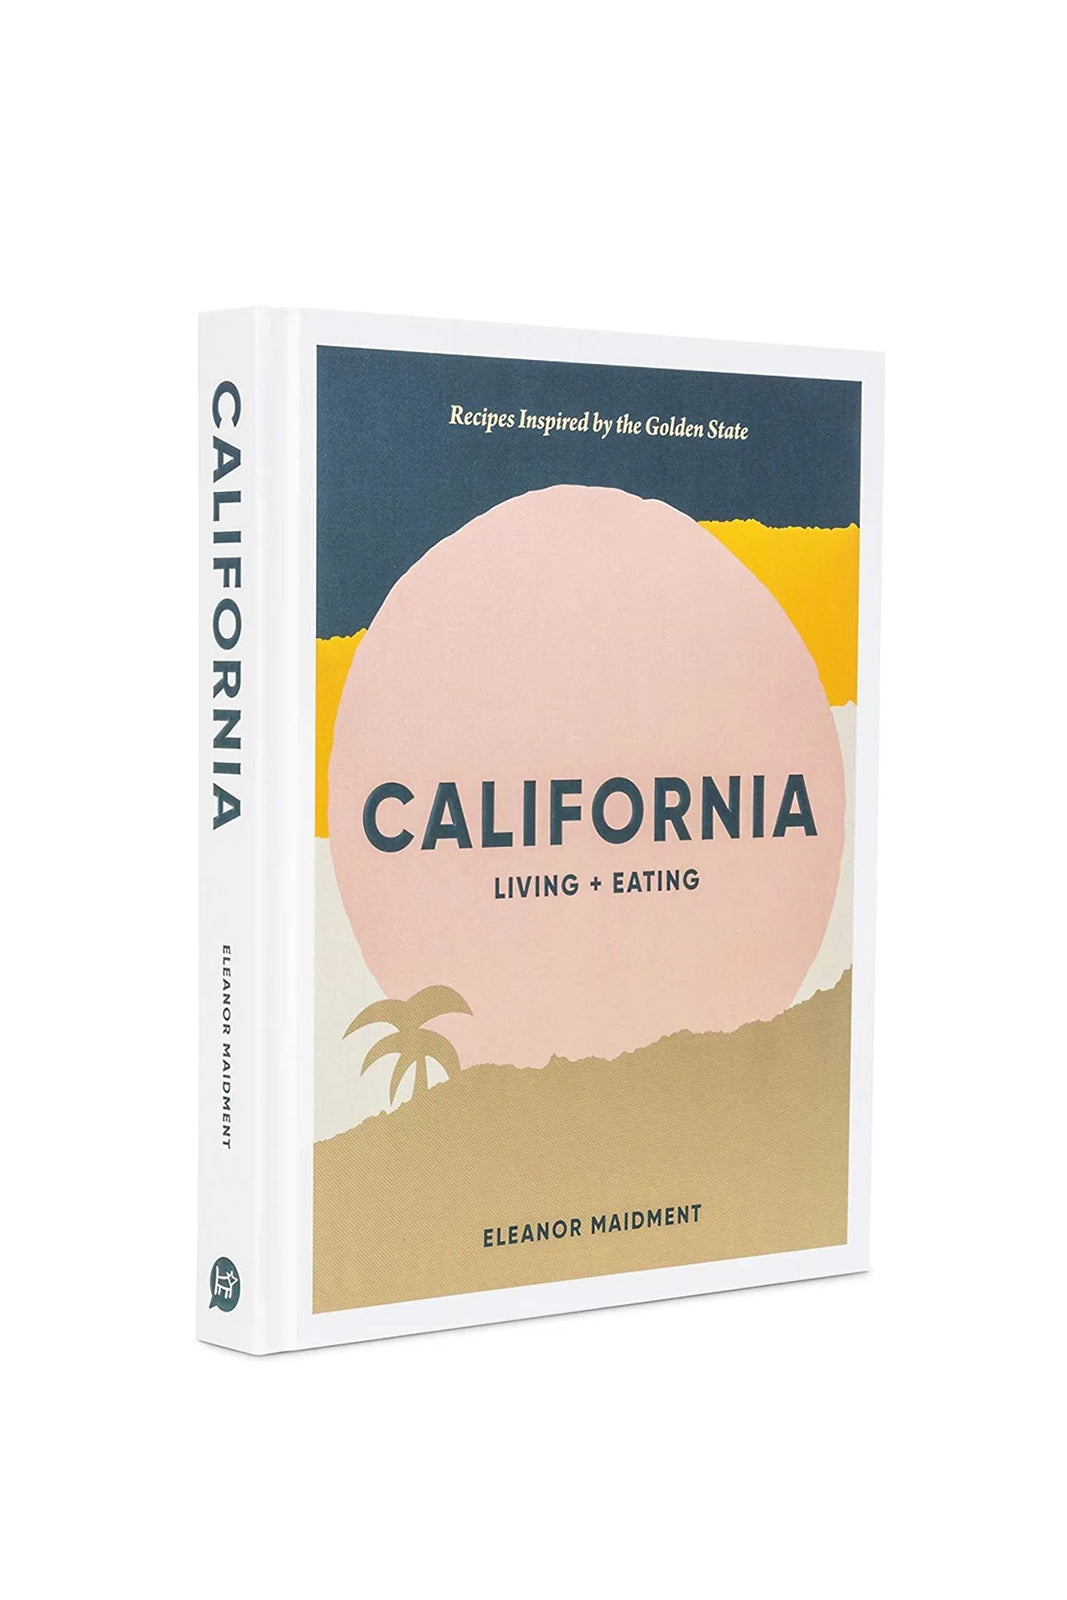 C IS FOR CALIFORNIA